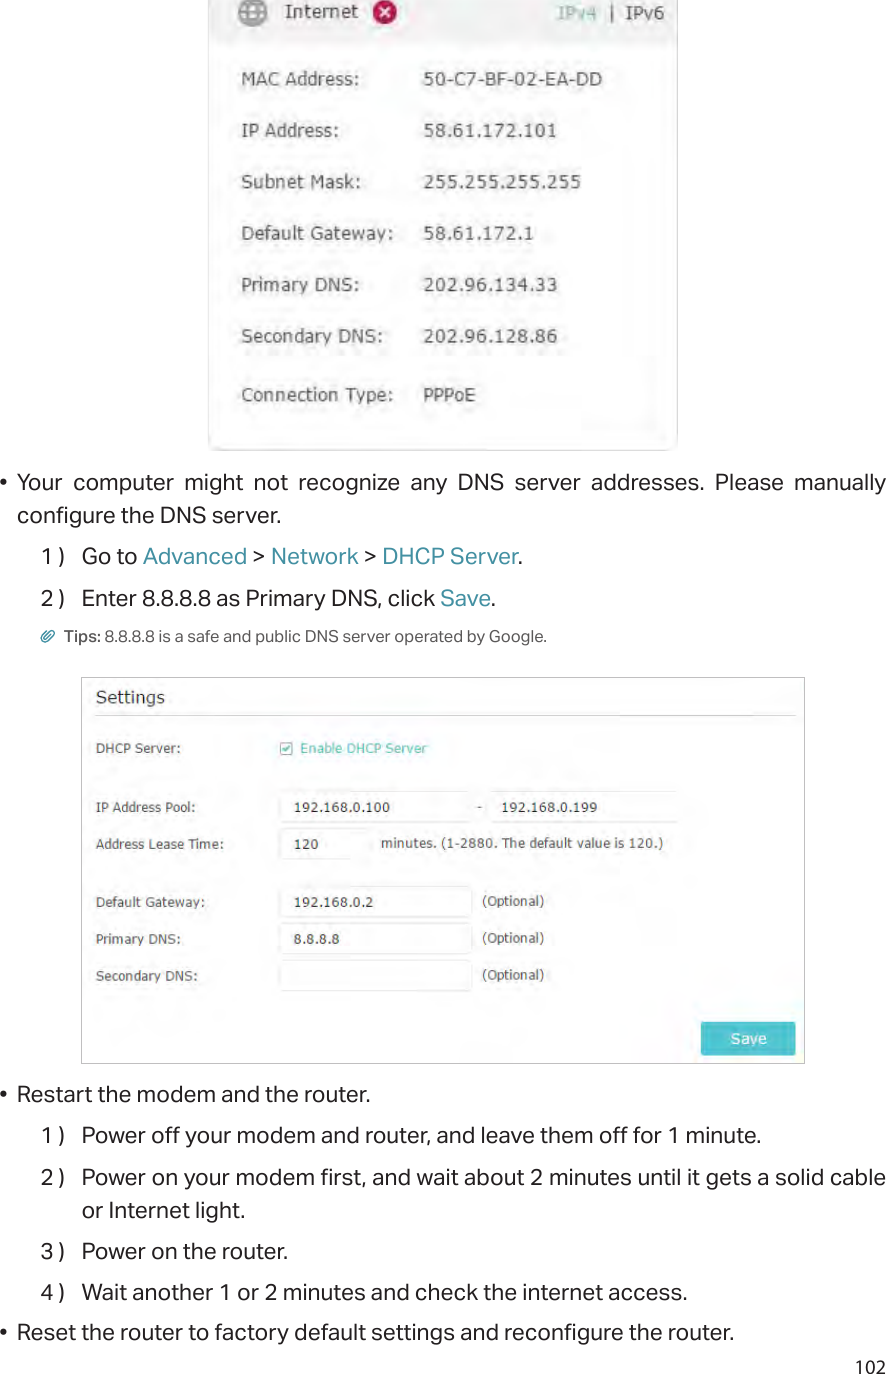 102• Your computer might not recognize any DNS server addresses. Please manually configure the DNS server.1 )  Go to Advanced &gt; Network &gt; DHCP Server.2 )  Enter 8.8.8.8 as Primary DNS, click Save. Tips: 8.8.8.8 is a safe and public DNS server operated by Google.•  Restart the modem and the router.1 )  Power off your modem and router, and leave them off for 1 minute.2 )  Power on your modem first, and wait about 2 minutes until it gets a solid cable or Internet light.3 )  Power on the router.4 )  Wait another 1 or 2 minutes and check the internet access.•  Reset the router to factory default settings and reconfigure the router.